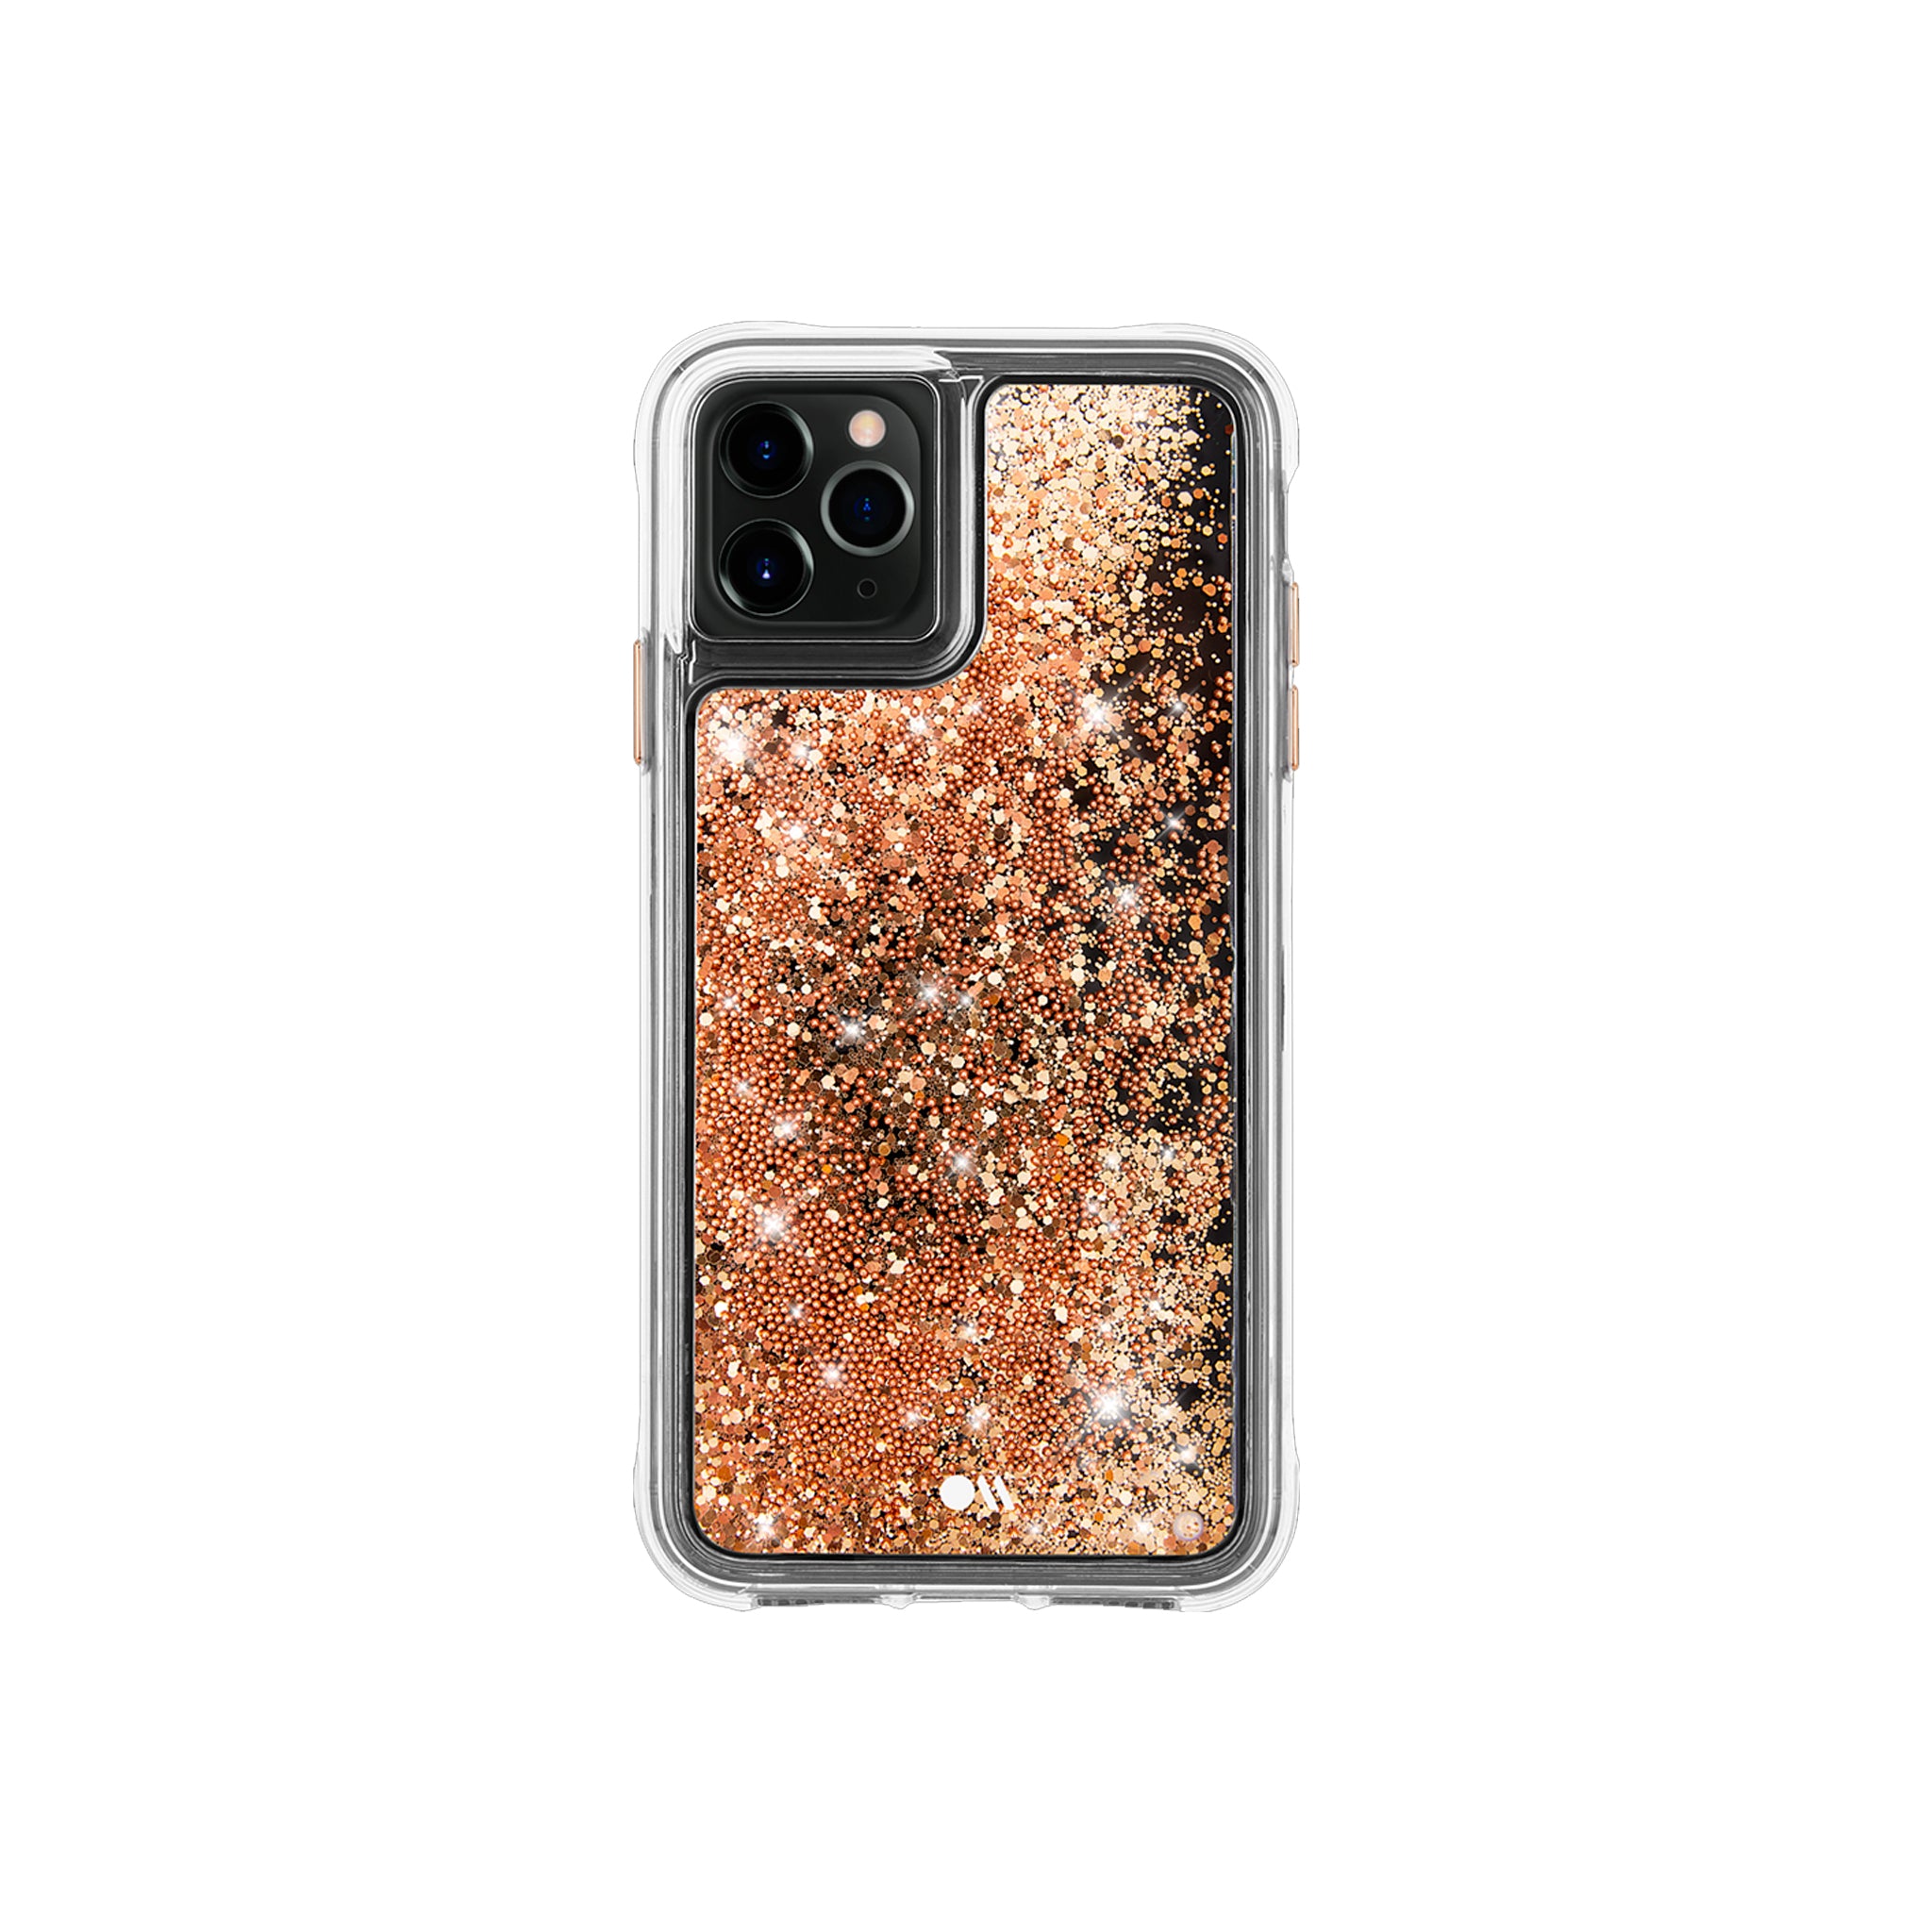 Case-mate - Waterfall Case For Apple iPhone 11 Pro Max - Gold